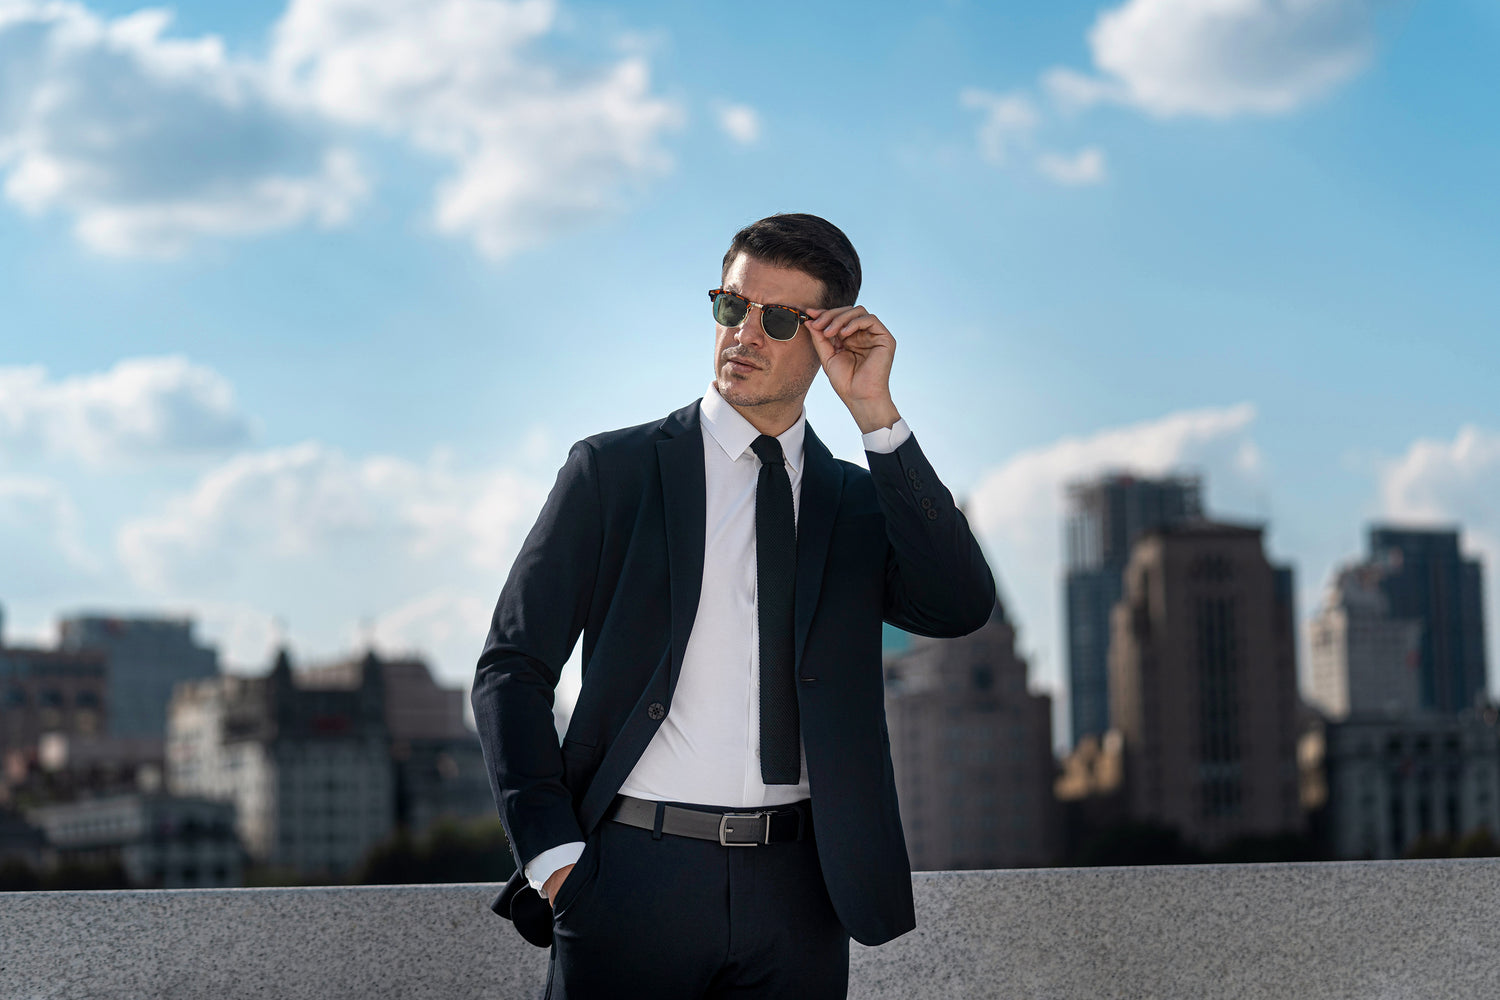 Casual, Smart Casual, and Business Casual… What’s the Difference?